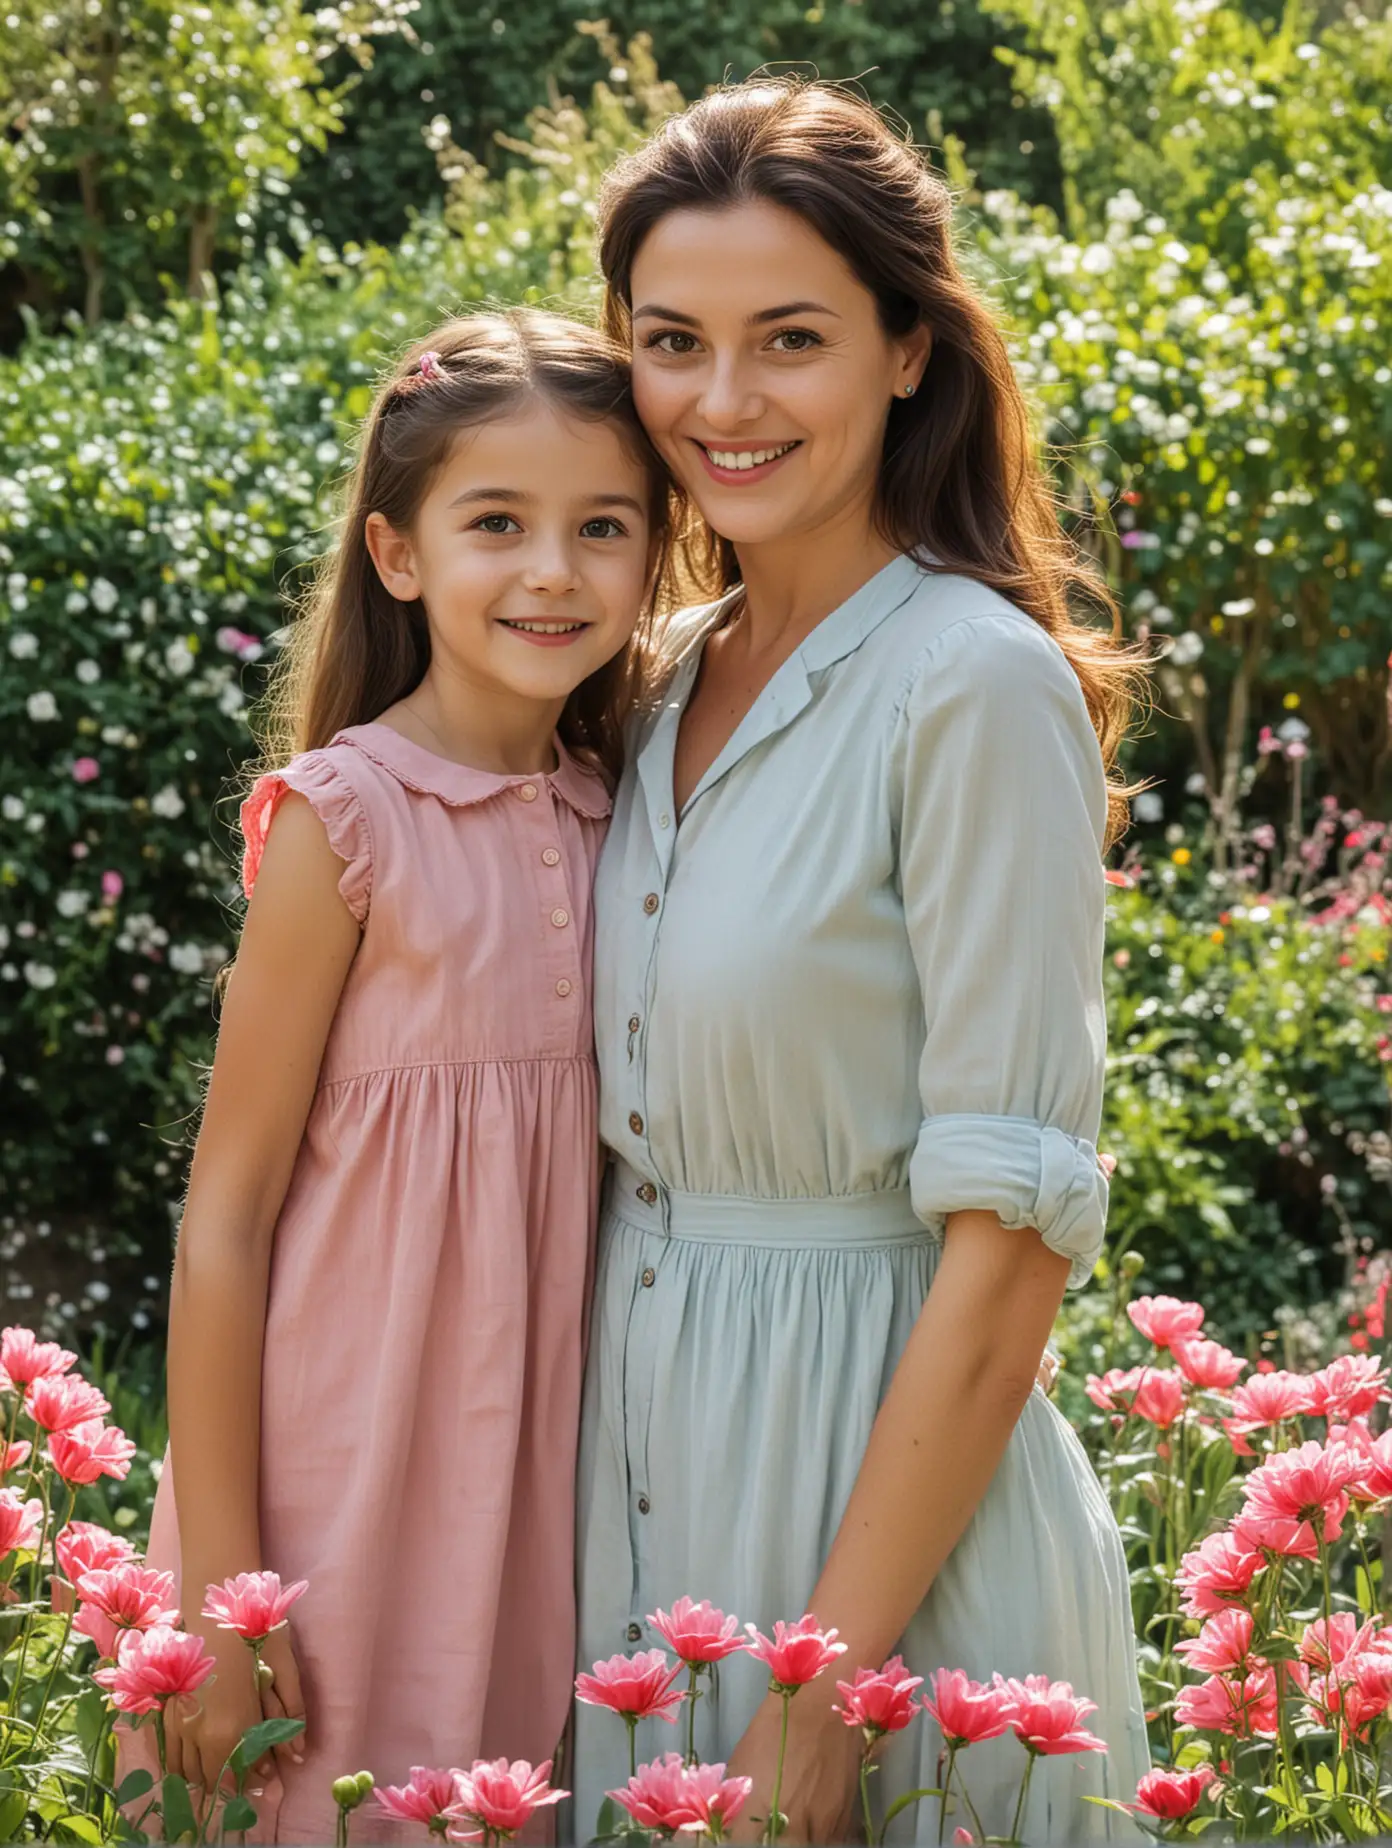 Mother and Daughter Sharing Love in Vibrant Garden Setting